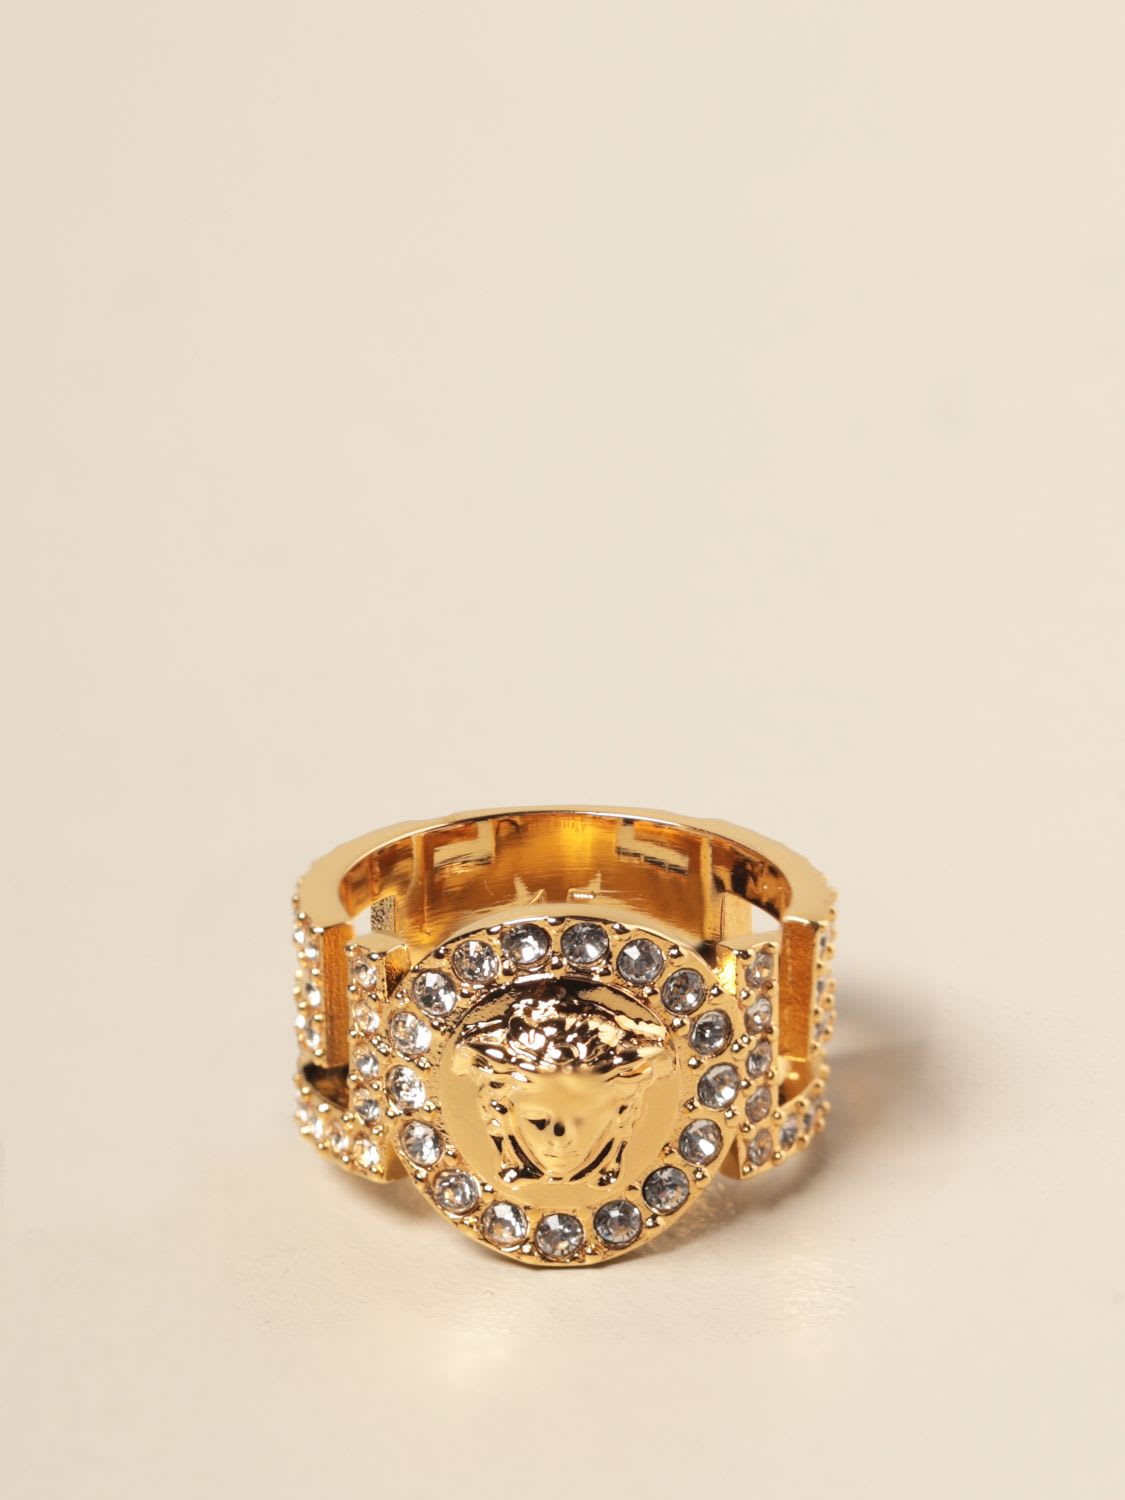 VERSACE RING WITH MEDUSA HEAD AND CRYSTALS,DG5E011 DJMX D01O